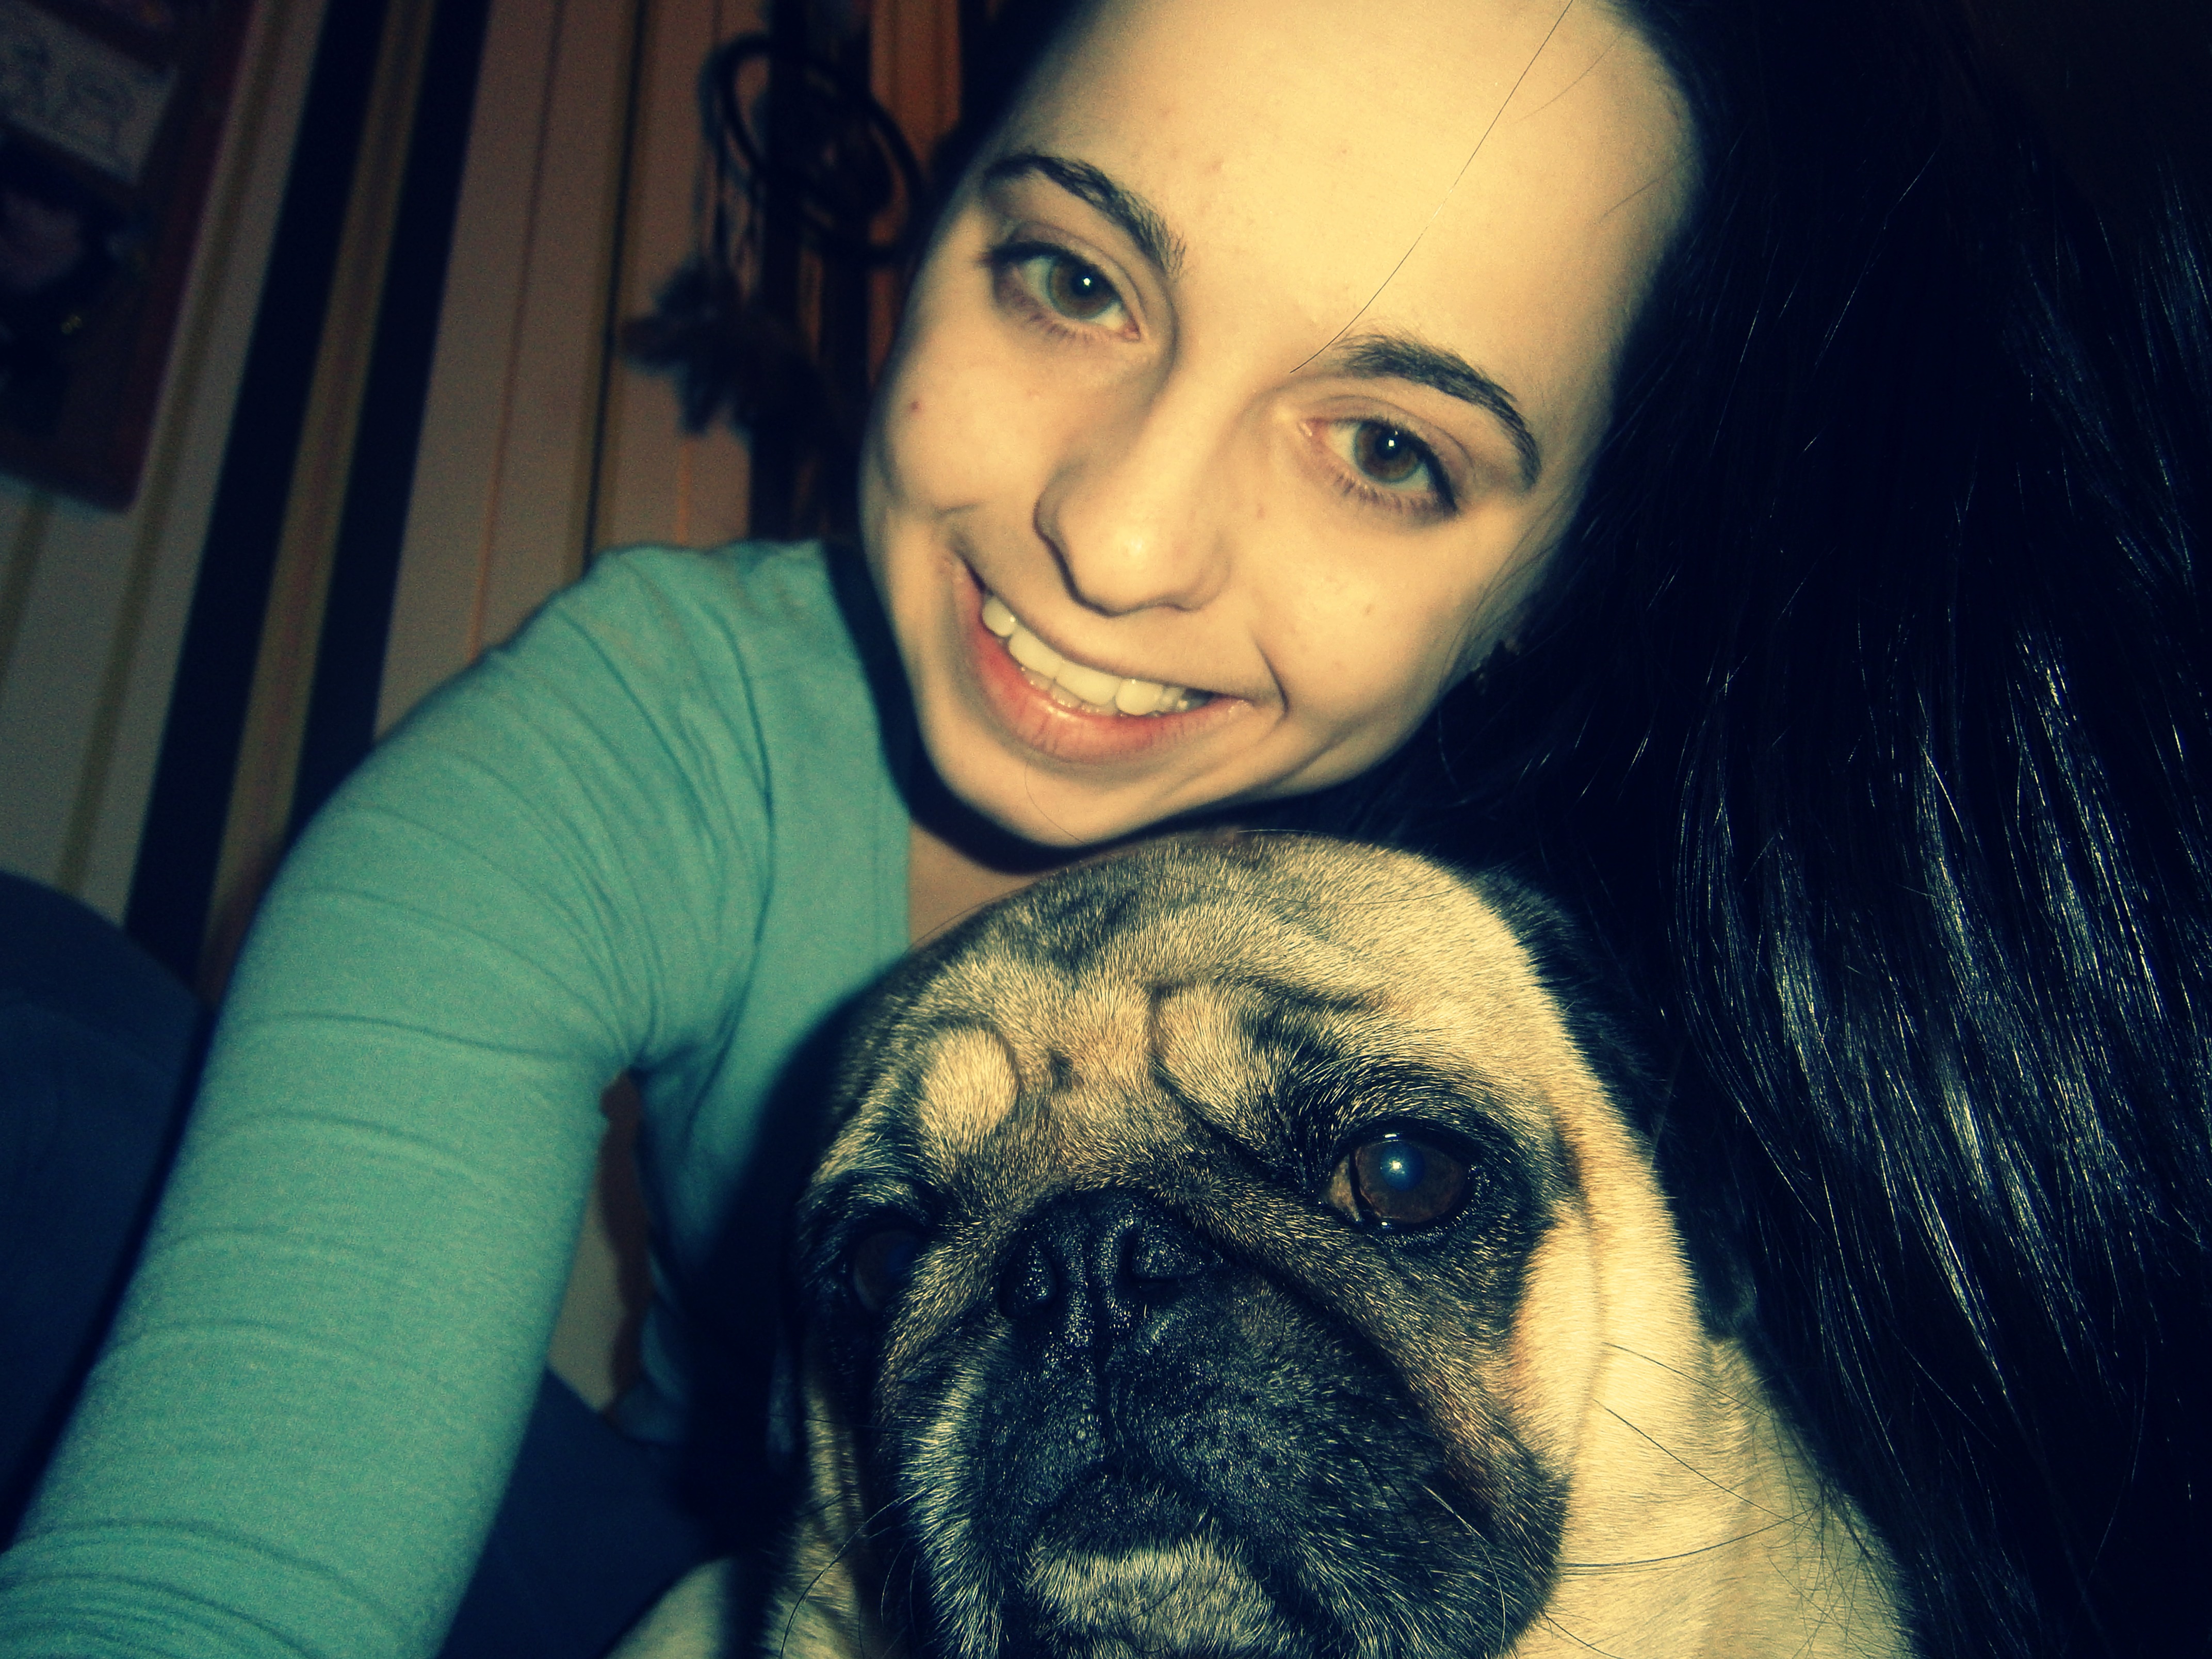 me and my little dog Nel :)